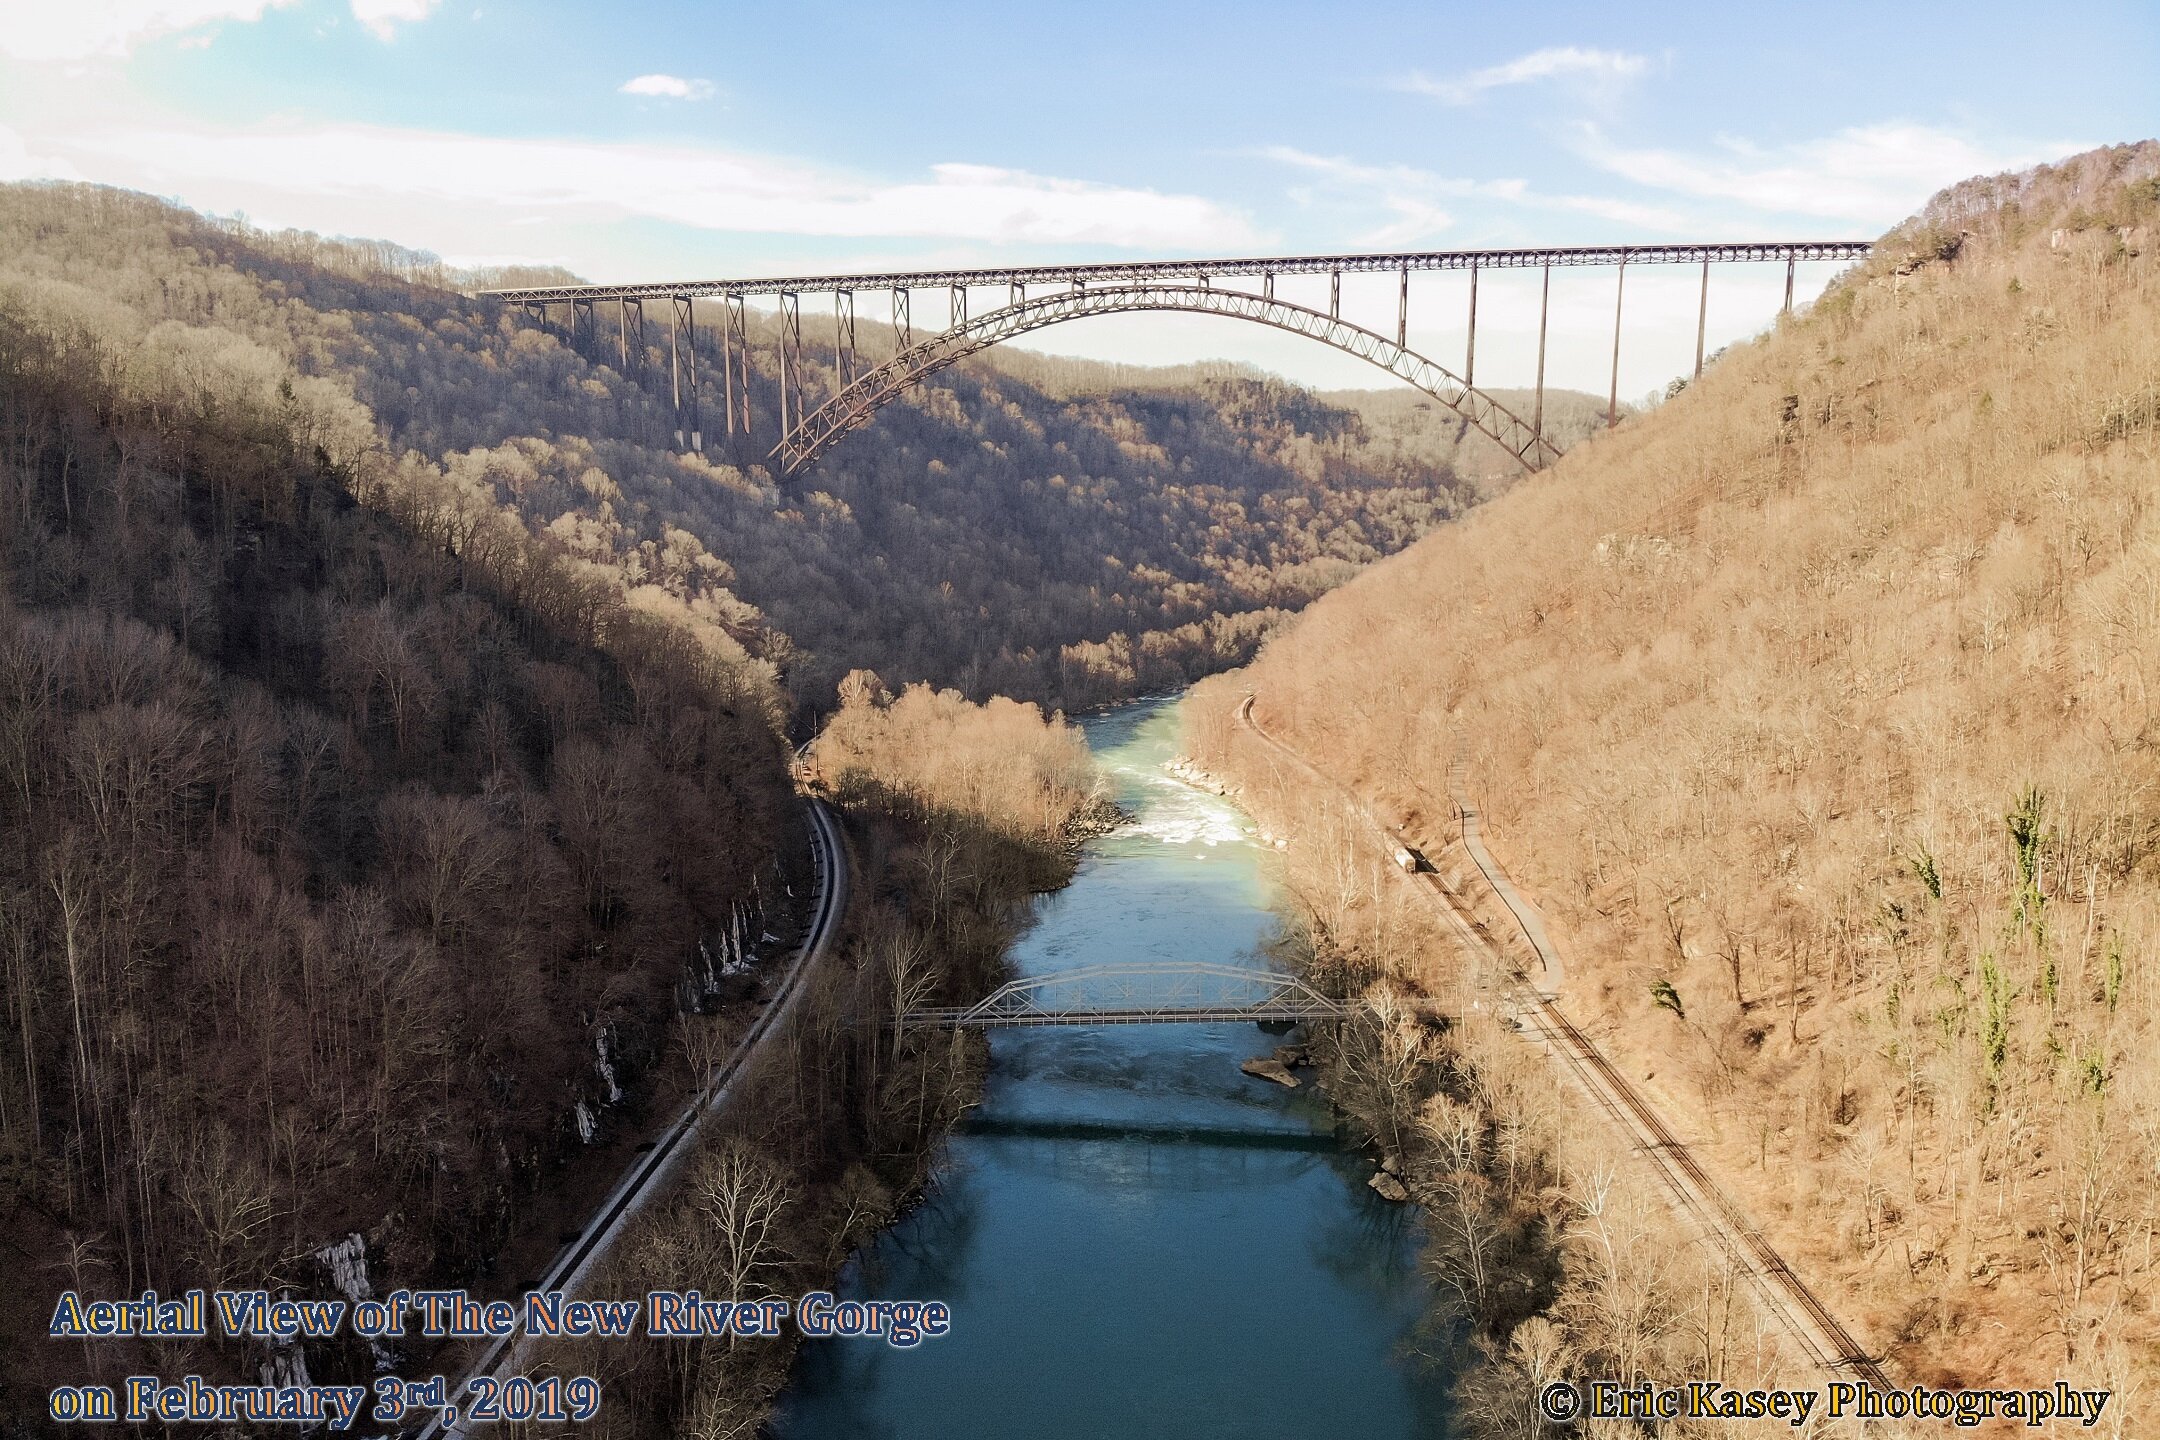 Aerial View of The New River Gorge on February 3rd, 2019.jpeg